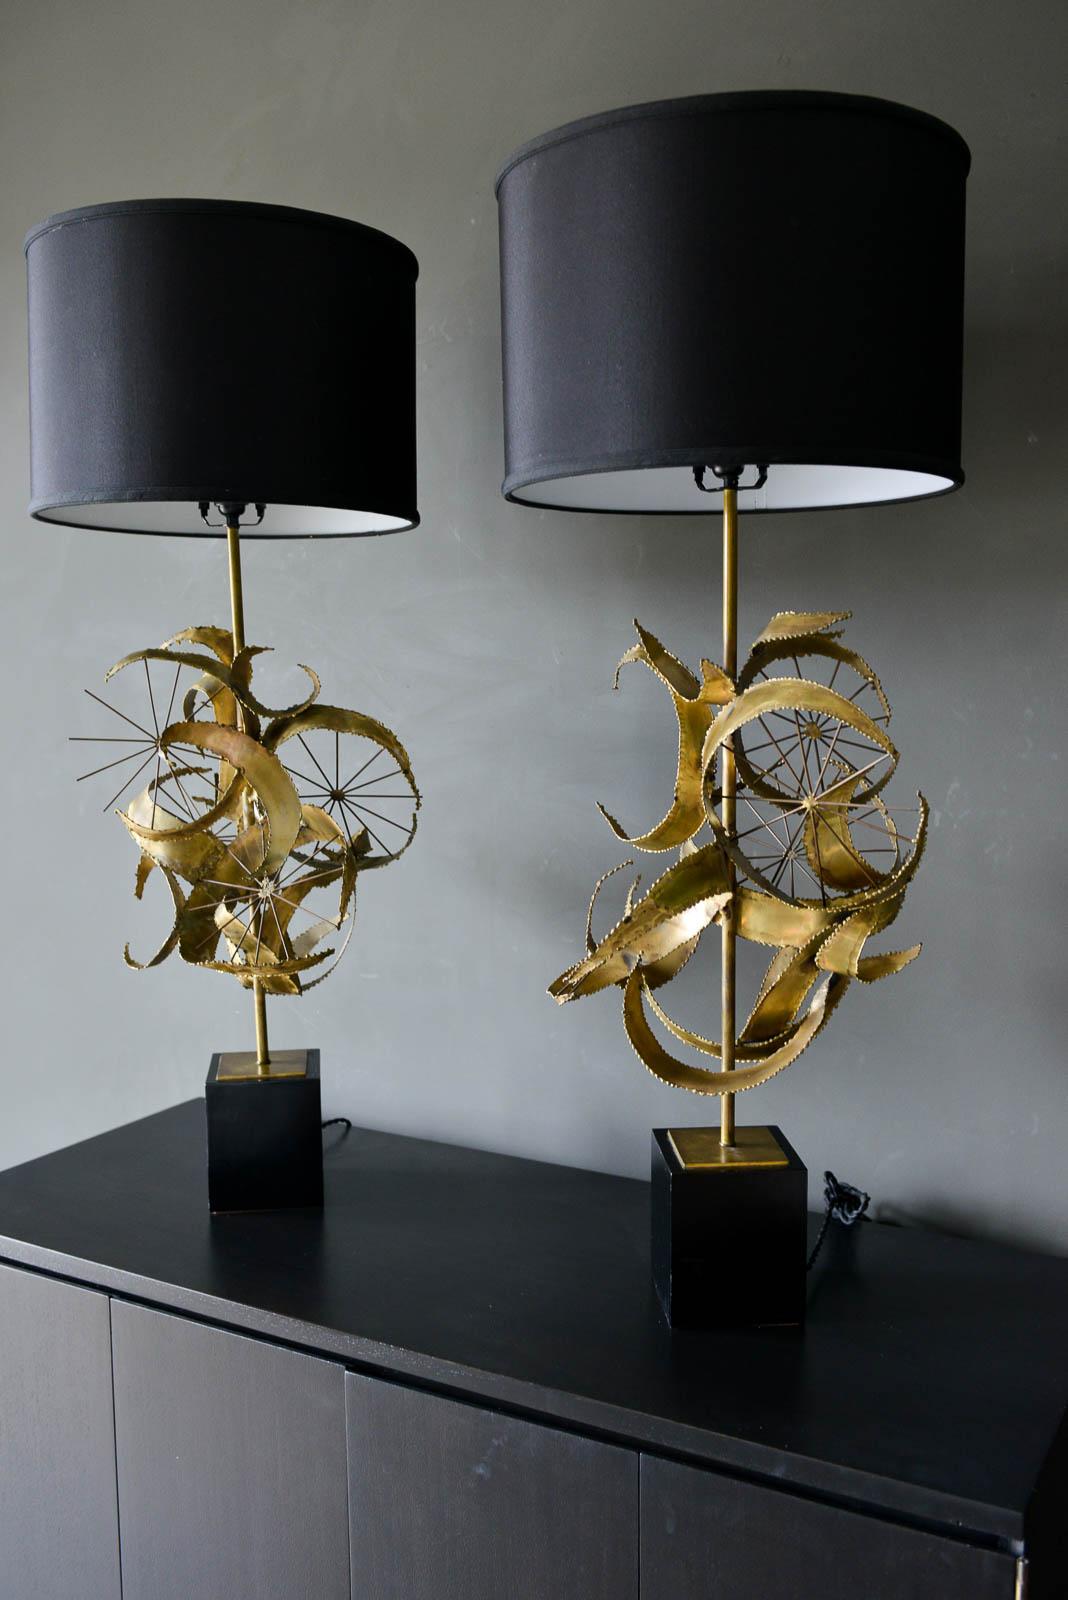 Pair of Brutalist torch cut metal lamps by Laurel Lamp Co., 1968. Beautiful pinwheel circle design with black bases and matching black shades. Gorgeous hard to find pair in very good original condition with original silk cord. Titled Setarrah Model